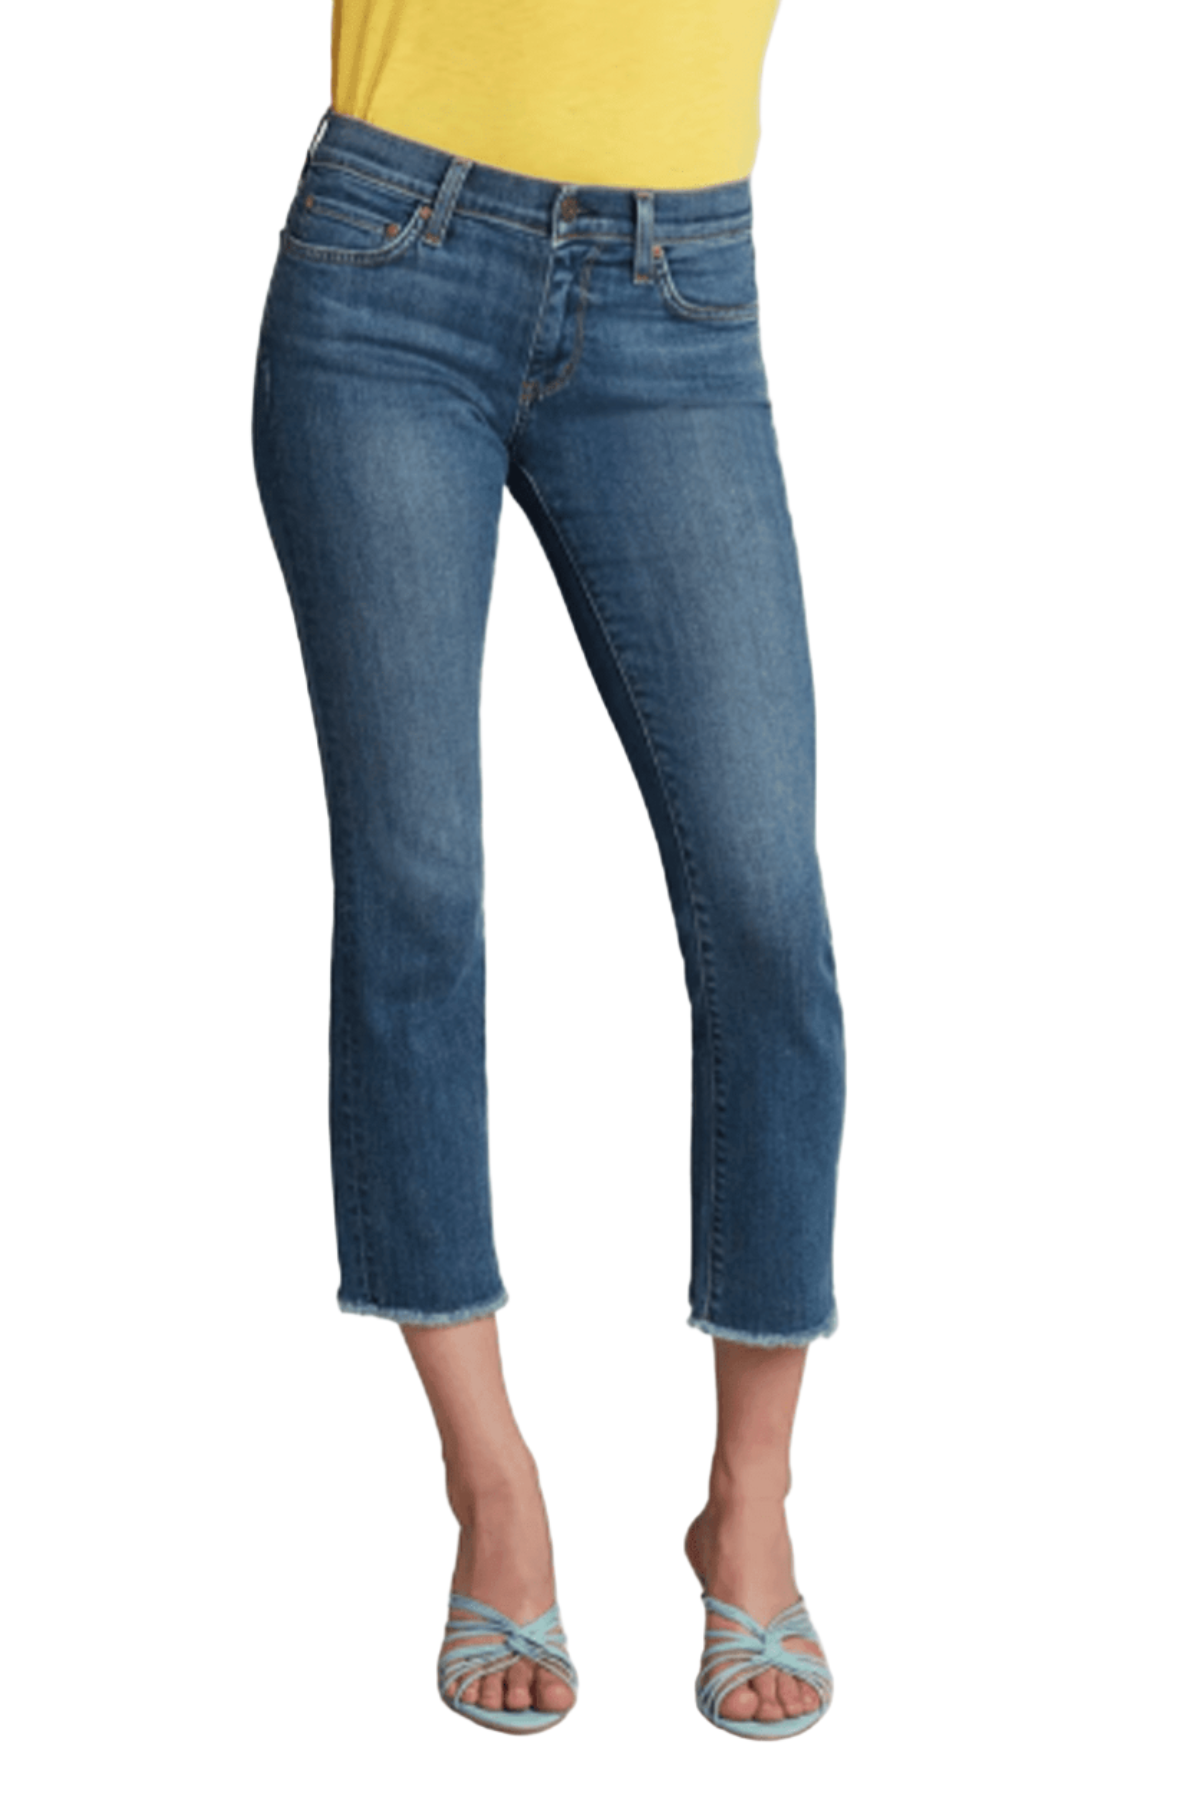 cropped mid-rise jeans by Principle Denim in the Flyaway Medium Wash